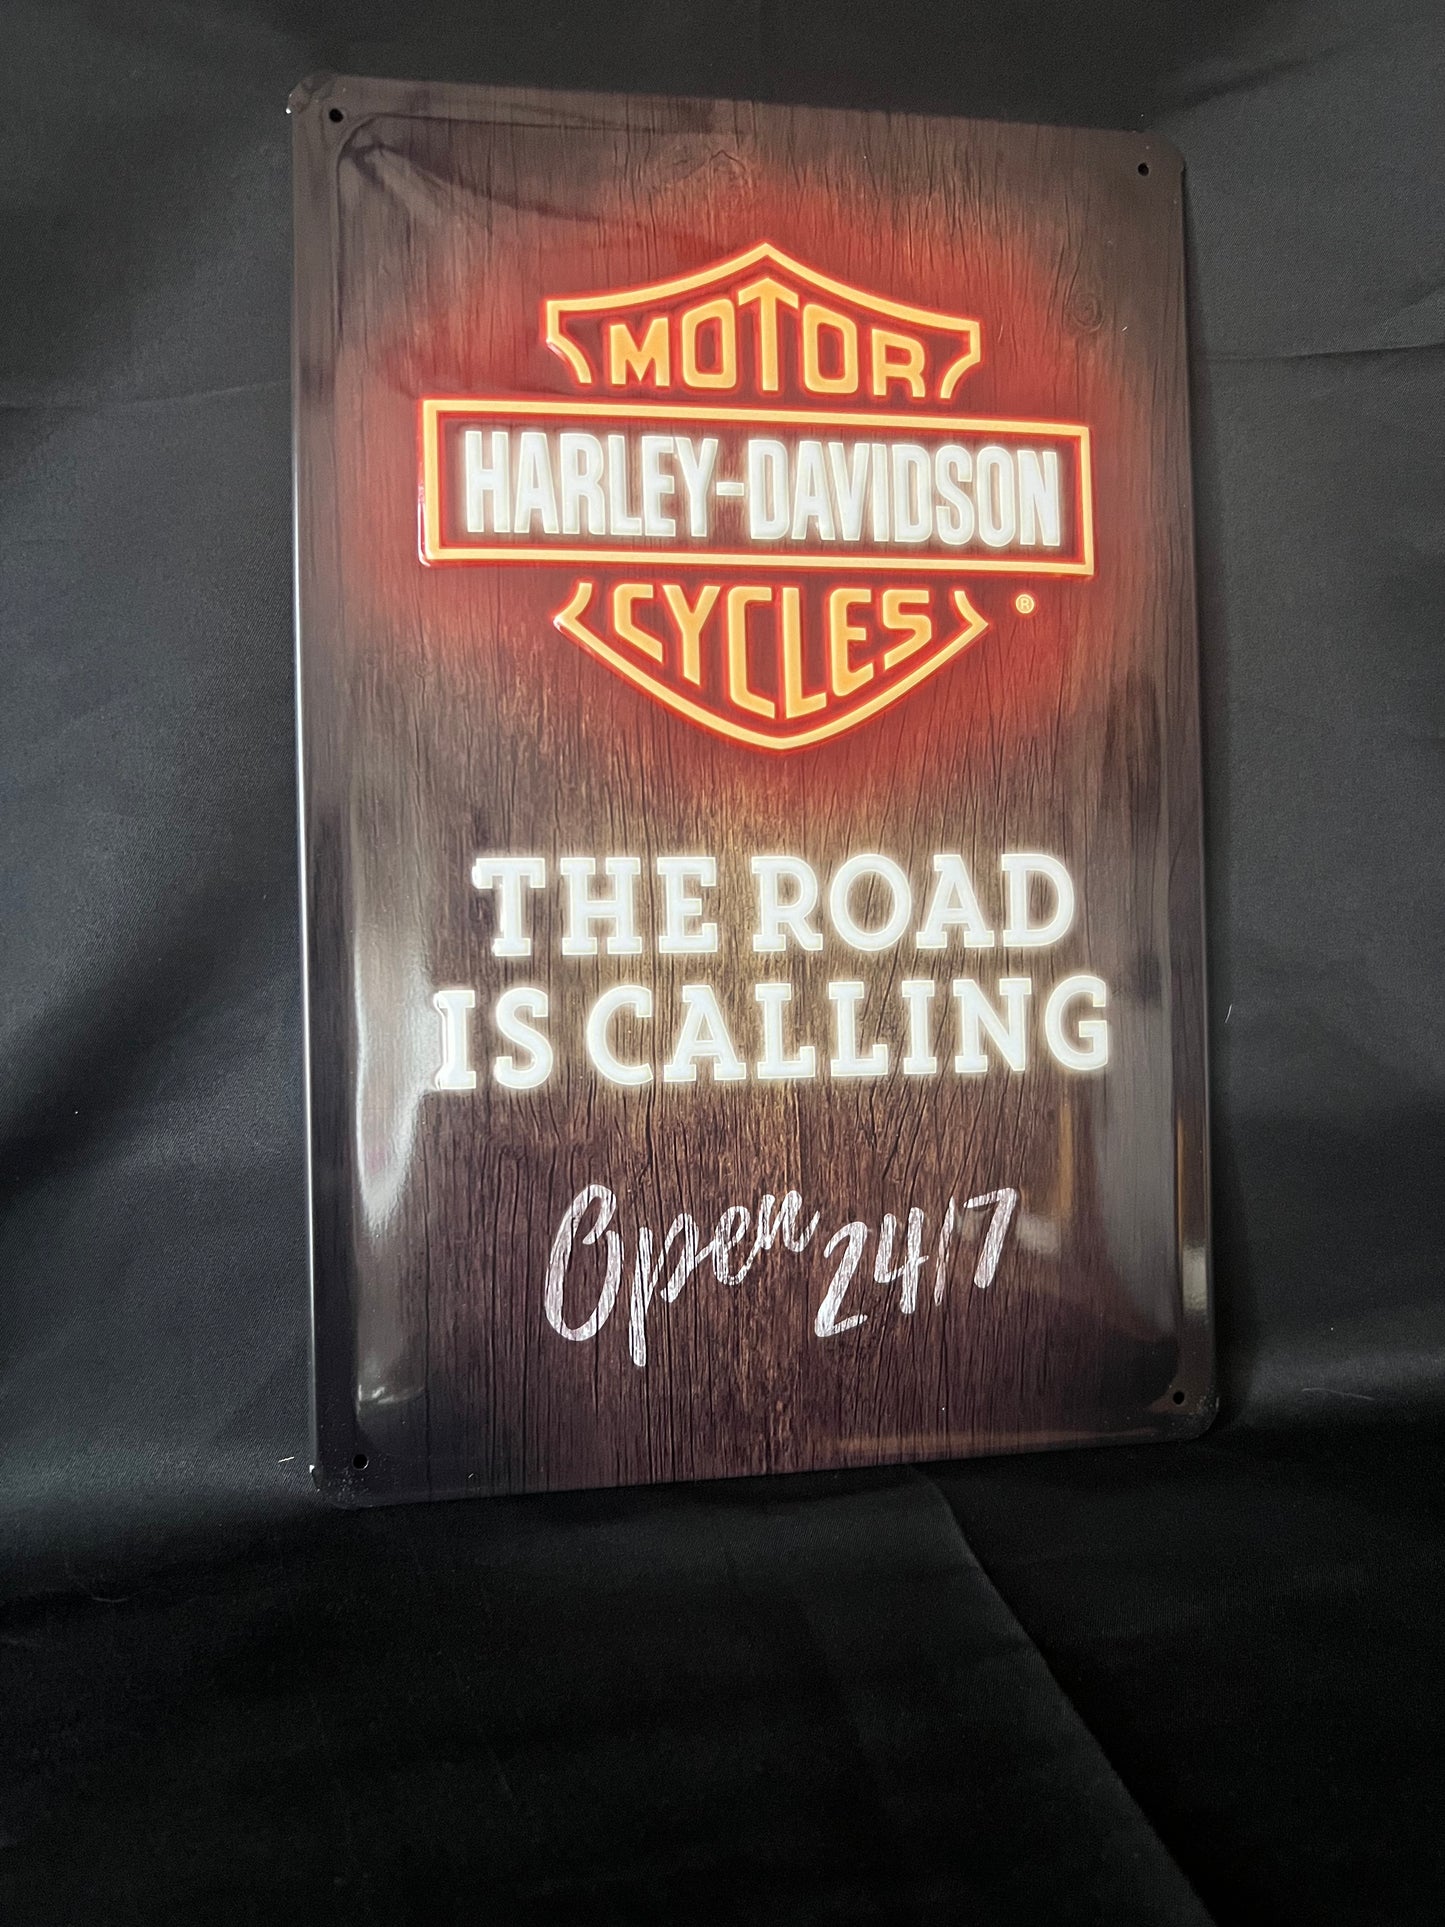 Blechschild "Harley Davidson the Road is calling"